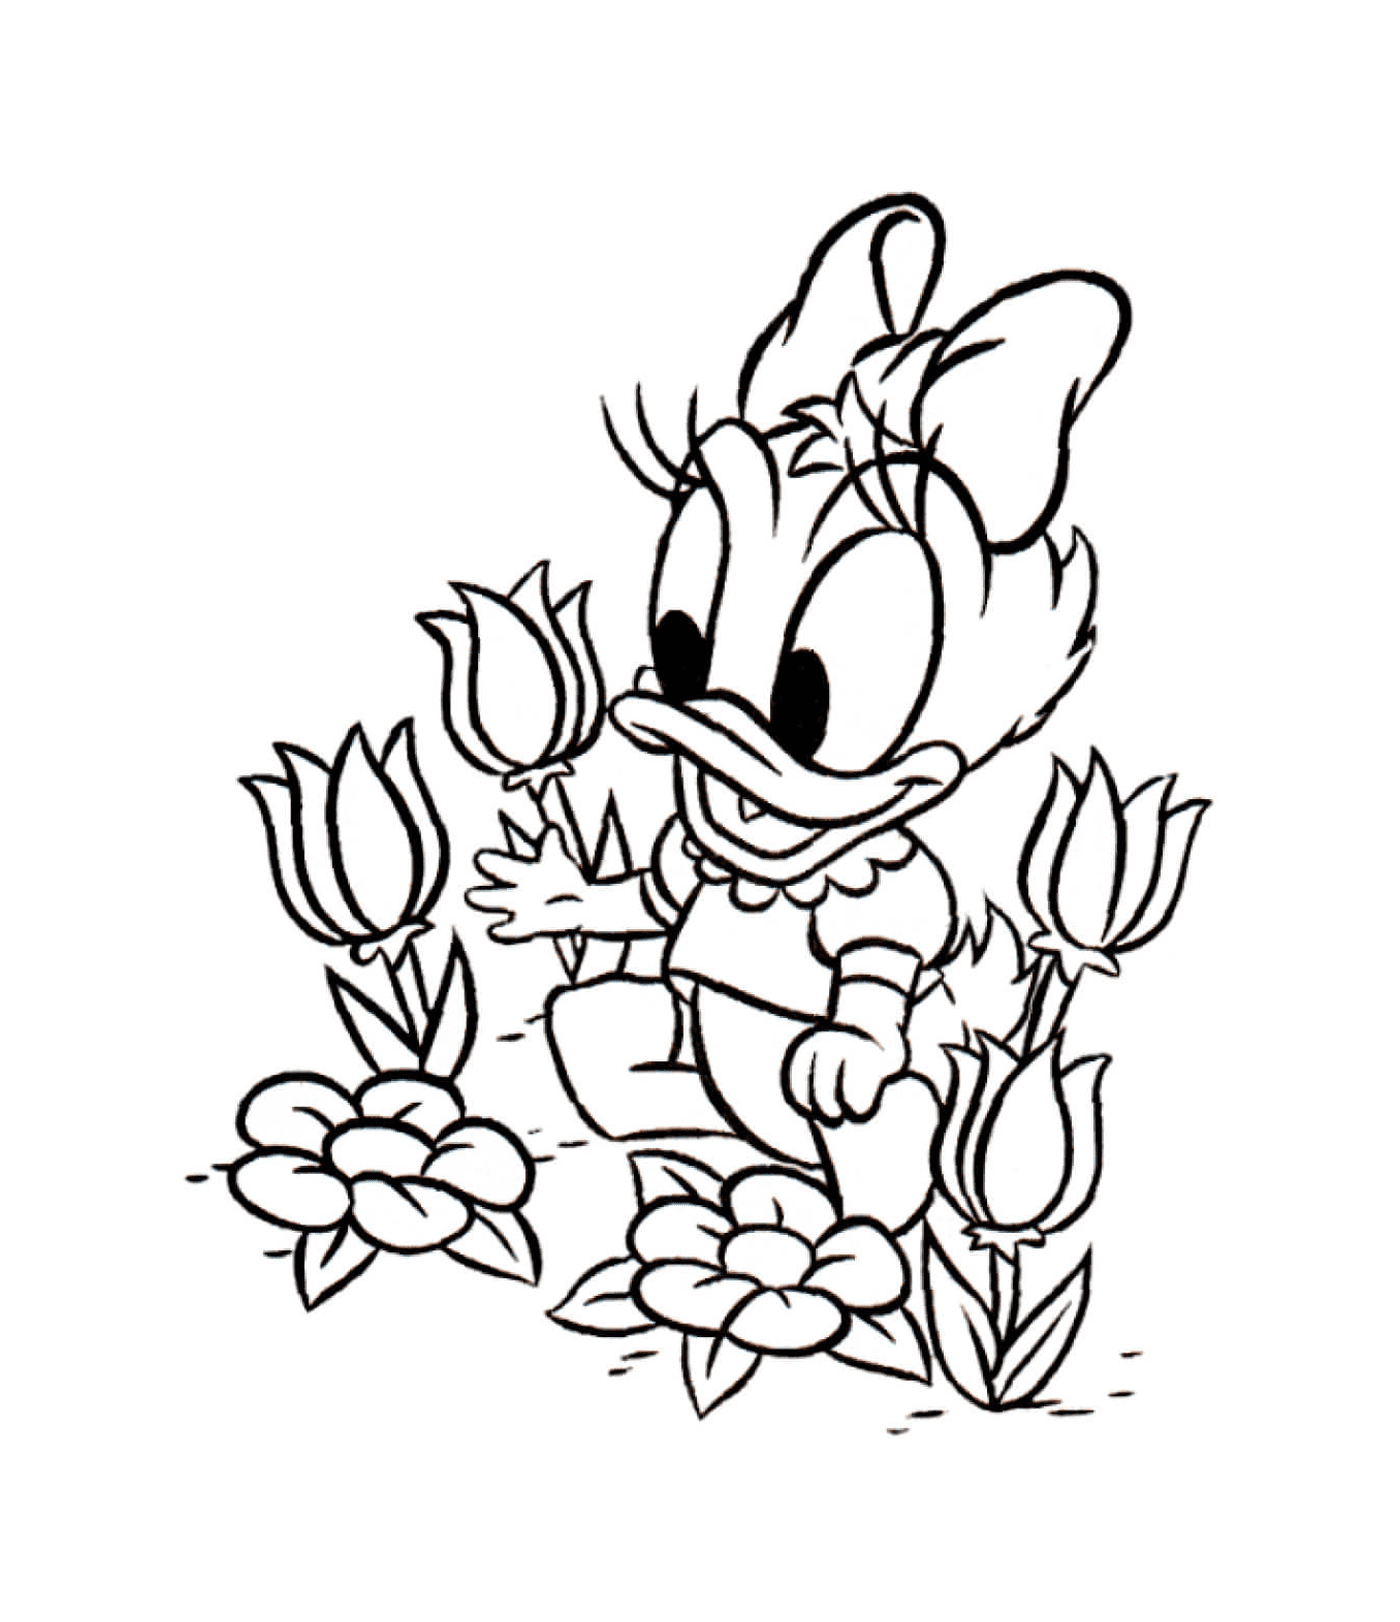  Daisy Duck with tulips 